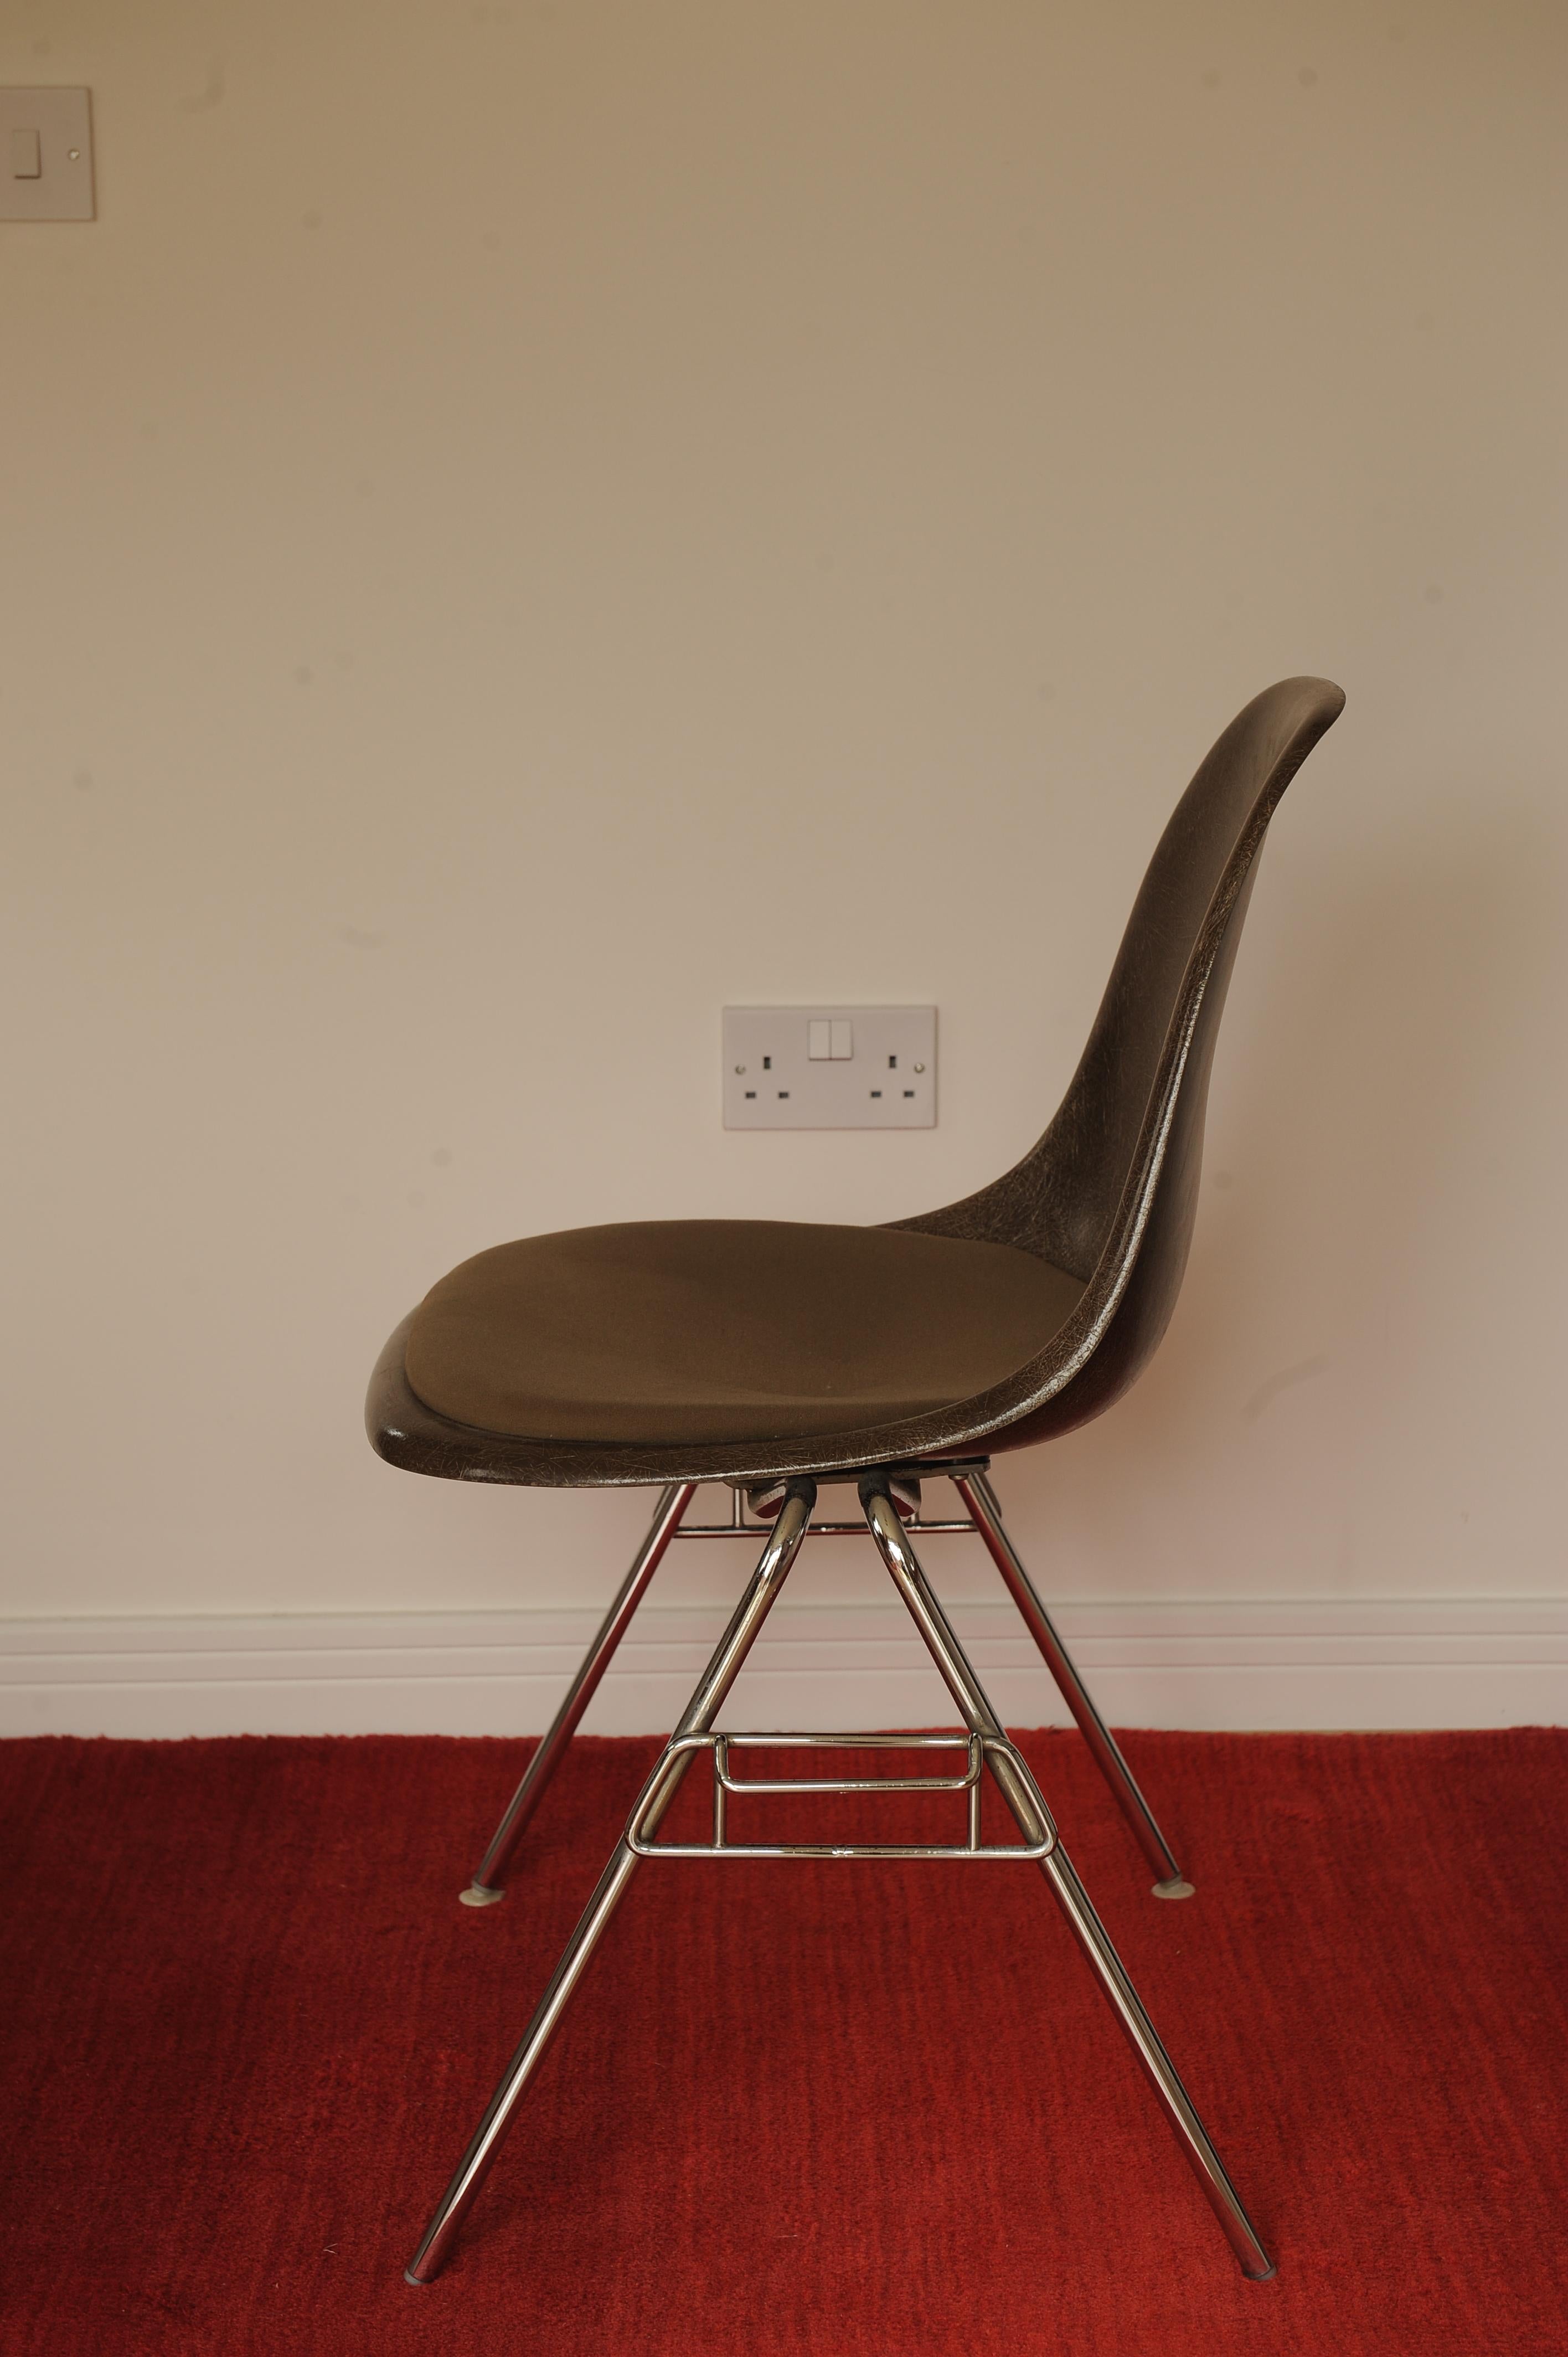 Late 20th Century Charles & Ray Eames Herman Miller Original DSS Fiberglass Chrome Stacking Chair For Sale